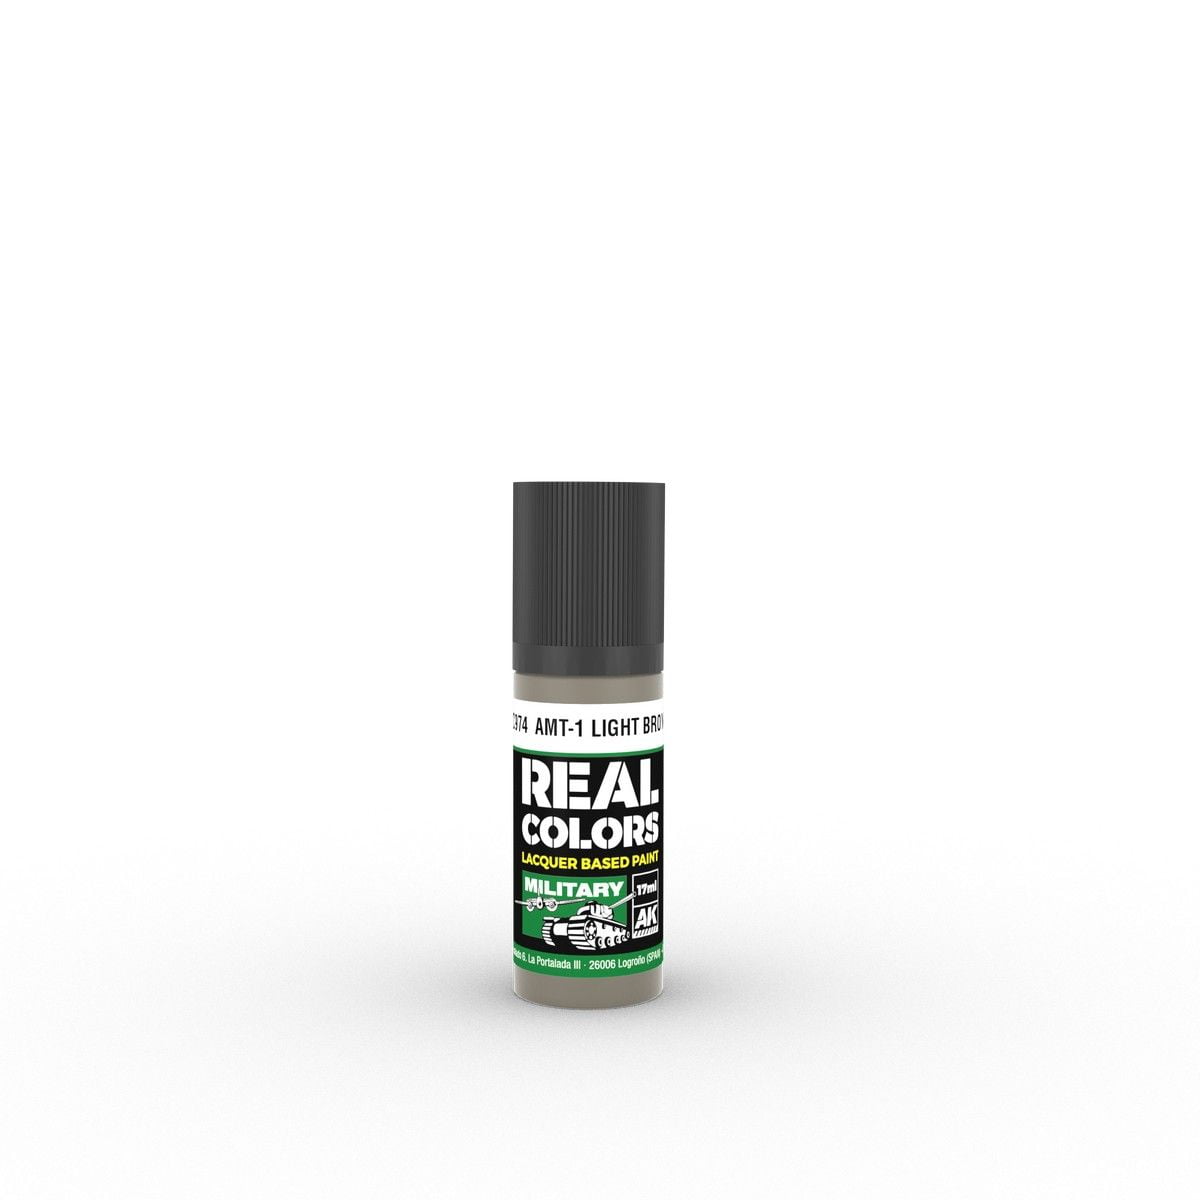 Real Colors Military: AMT-1 Light Brown 17ml